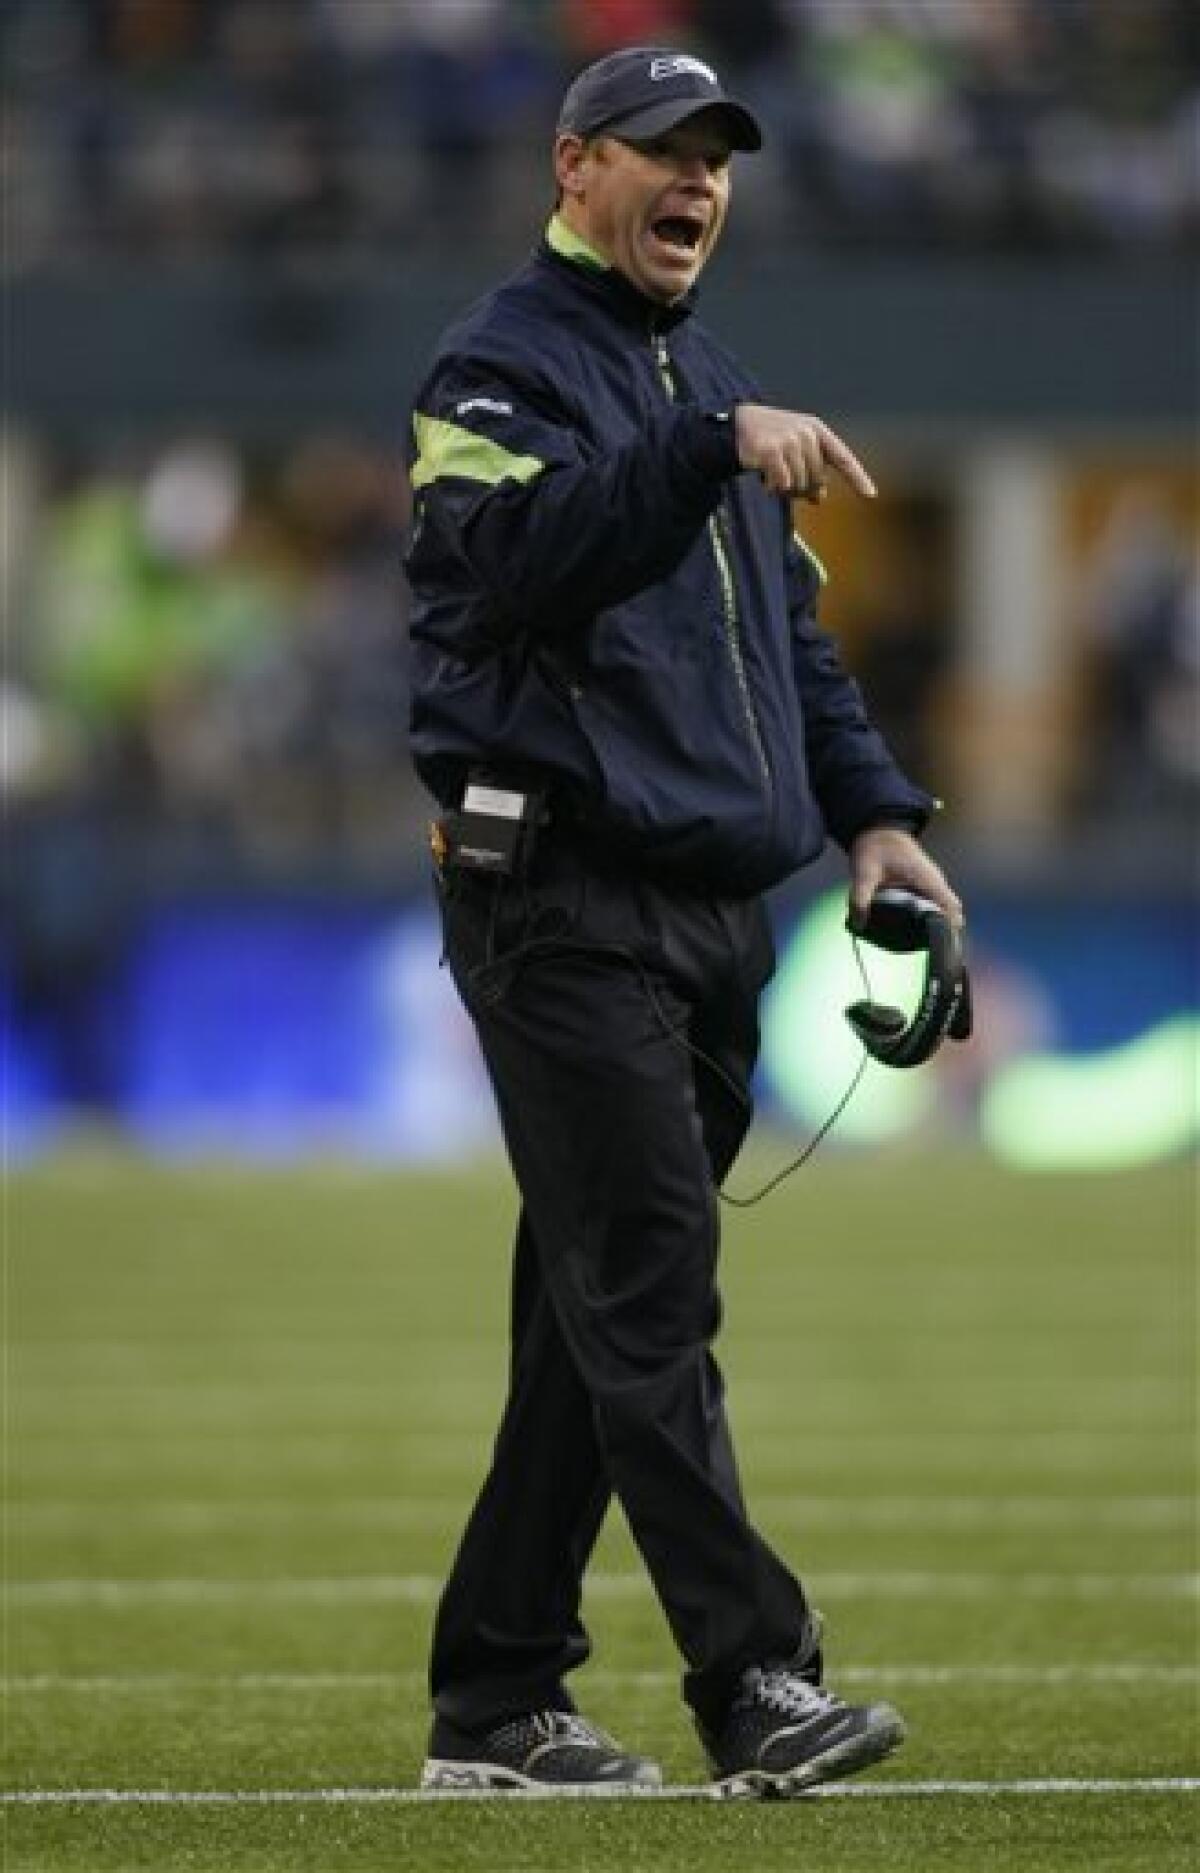 Mora out as coach of Seahawks after just 1 season - The San Diego  Union-Tribune